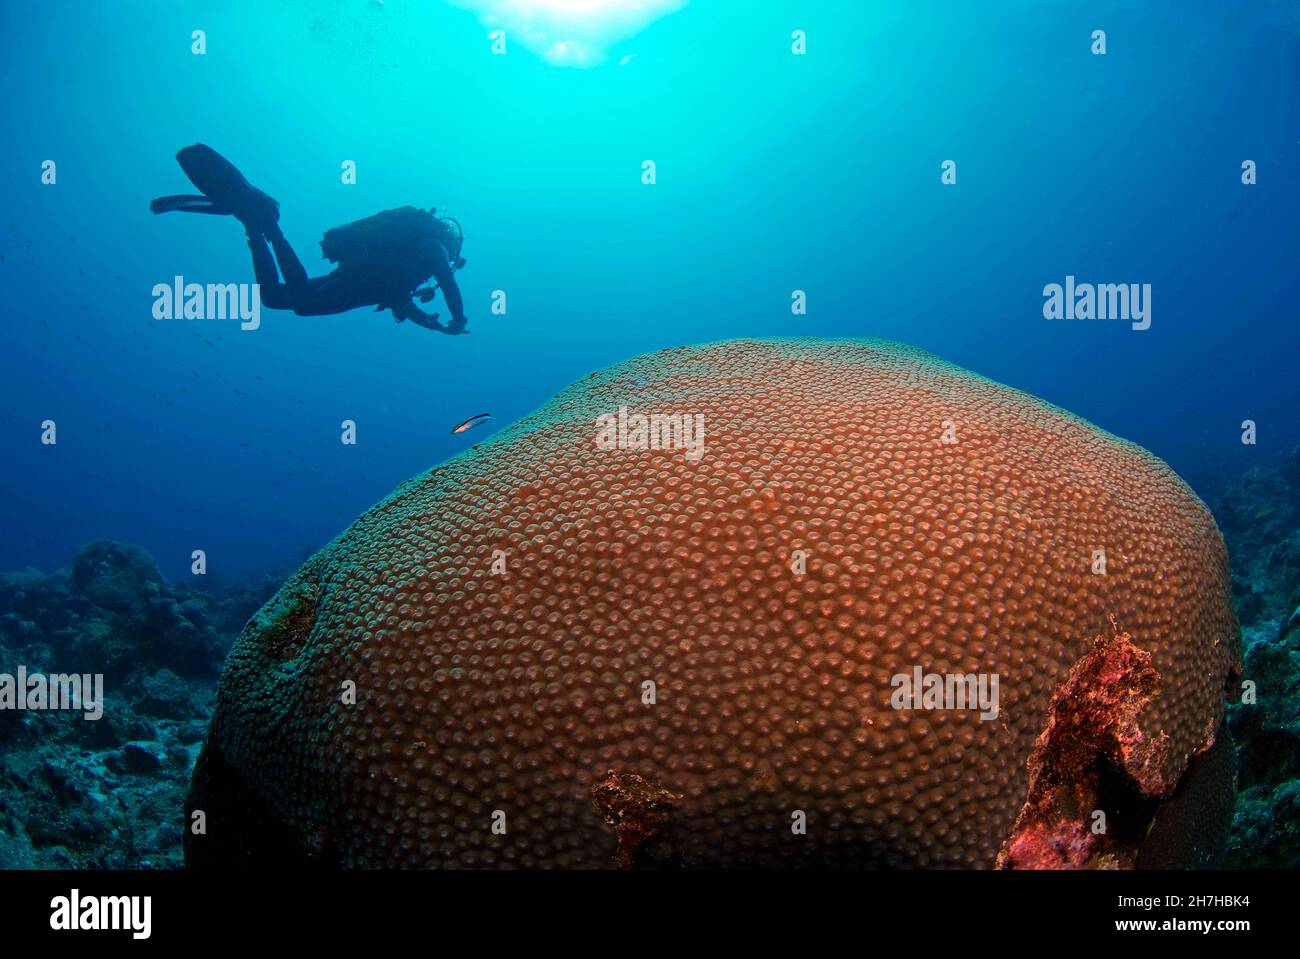 MADAGASCAR. INDIAN OCEAN. DIVER AND CORAL. Stock Photo